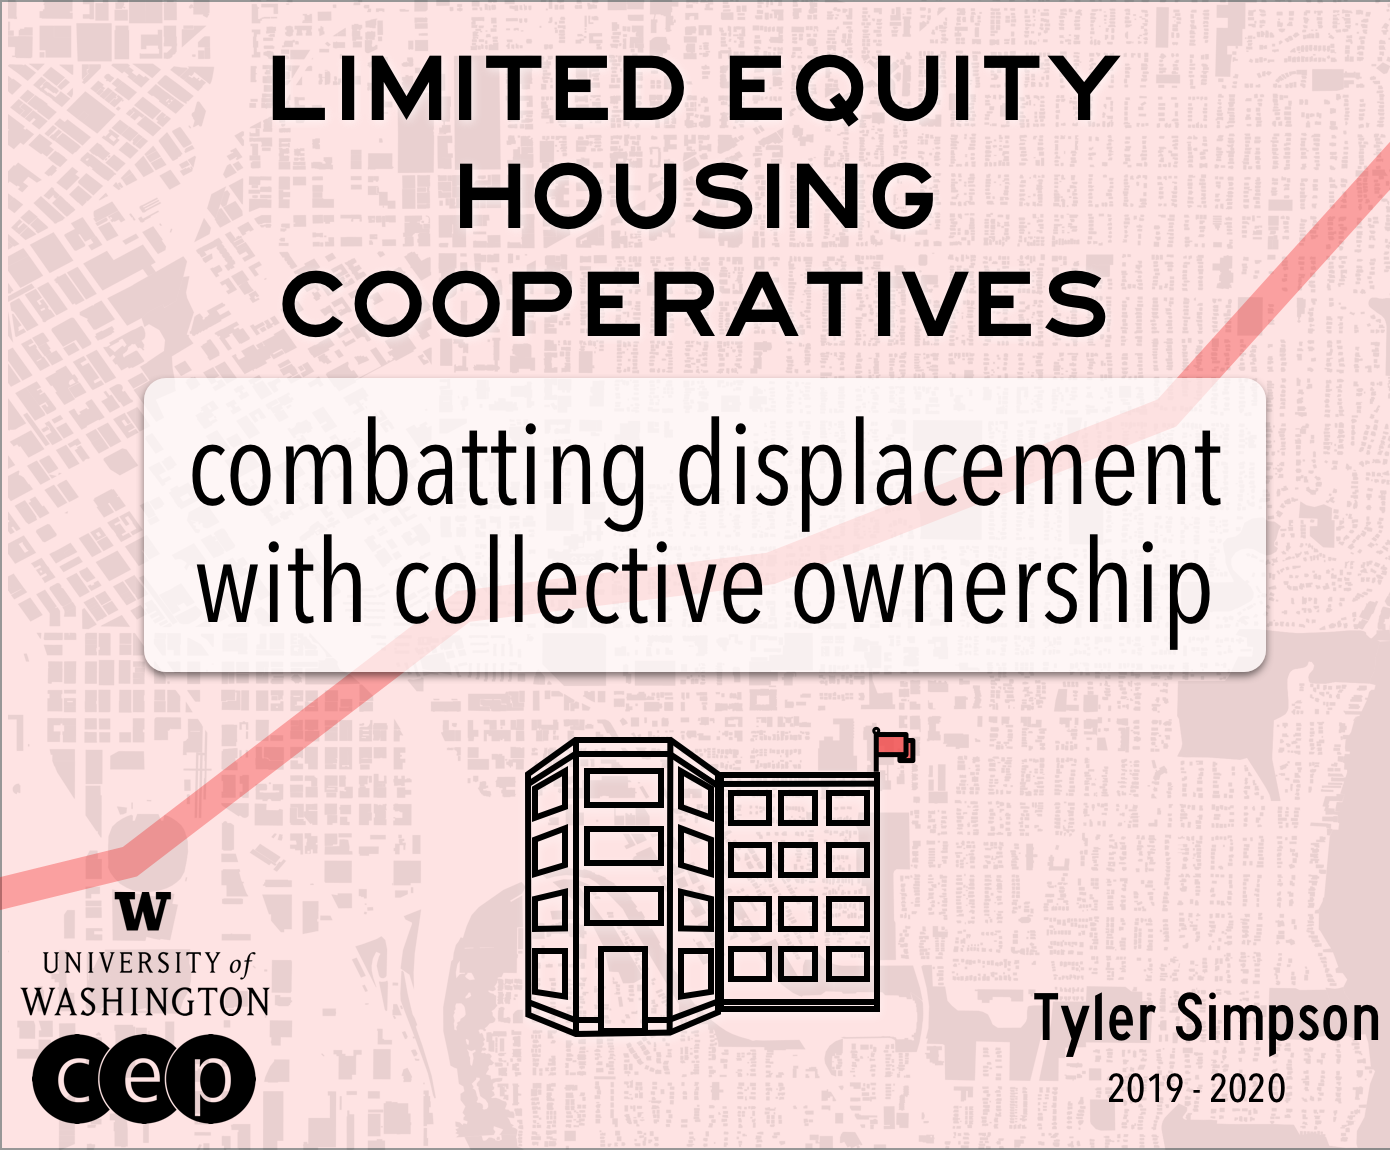 Limited Equity Cooperatives: combating displacement with collective ownership